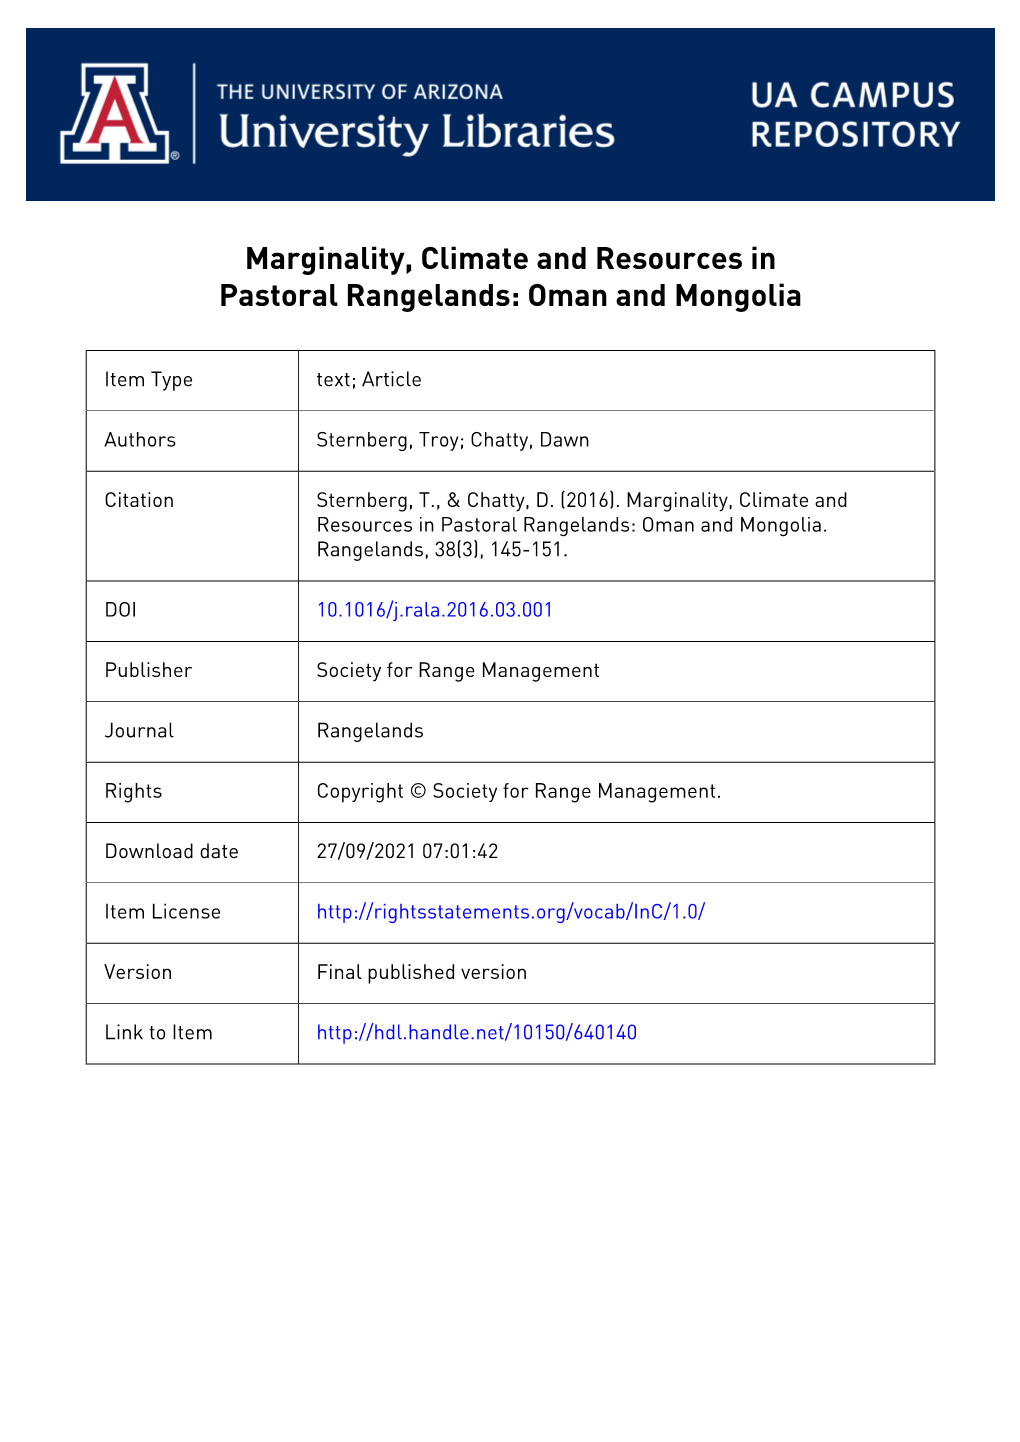 Marginality, Climate and Resources in Pastoral Rangelands: Oman and Mongolia